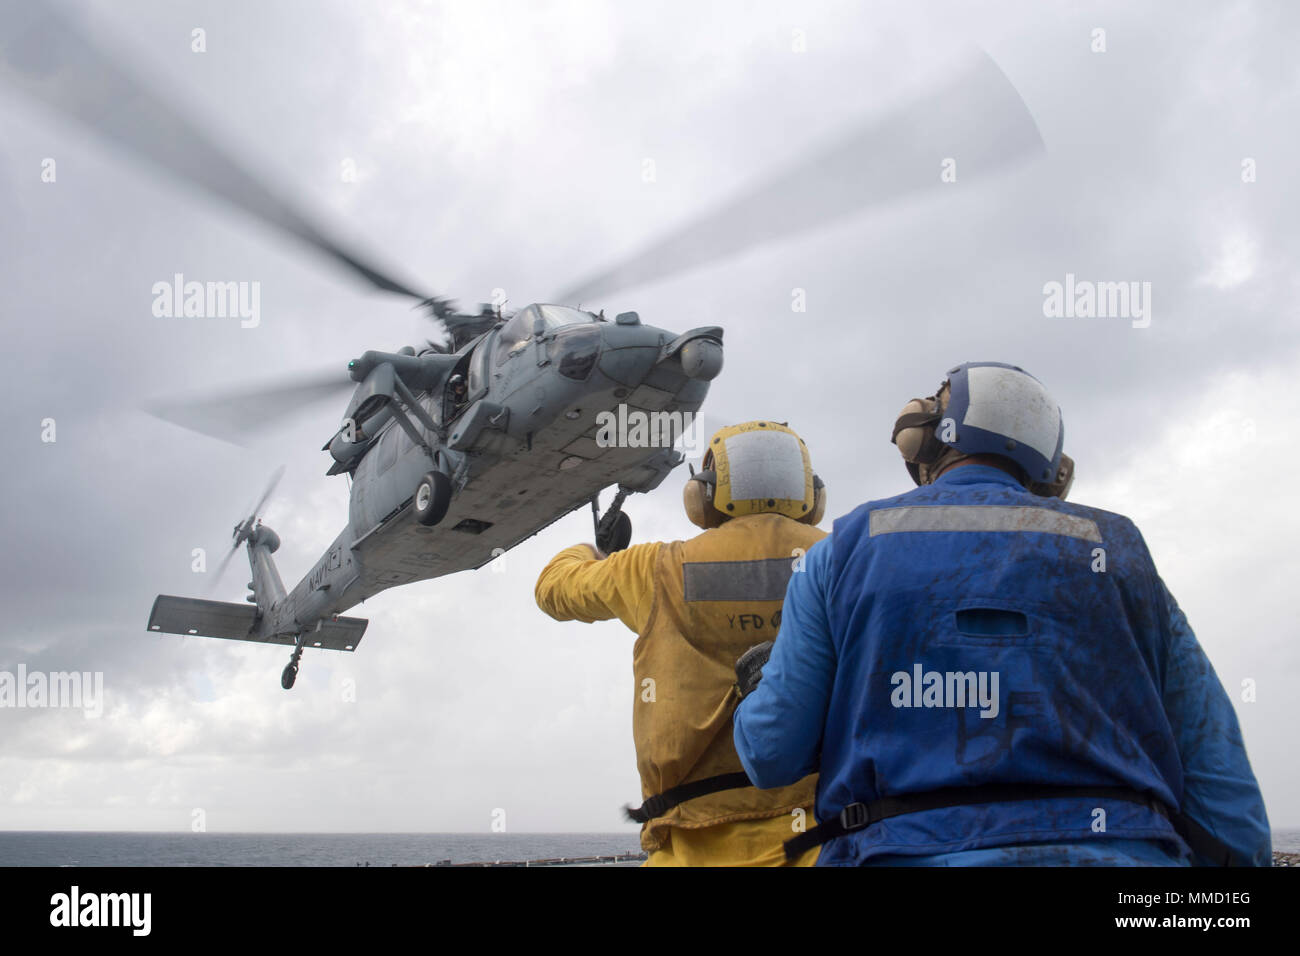 171015-N-DQ503-089 CARIBBEAN SEA (Oct. 15, 2017) Boatswain's Mate 2nd Class Jordan Johnson signals to an MH60S Seahawk helicopter as it lifts off of the flight deck of the dock landing ship USS Oak Hill (LSD 51). The Department of Defense is supporting Federal Emergency Management Agency, the lead federal agency, in helping those affected by Hurricane Maria to minimize suffering and is one component of the overall whole-of-government response effort. (U.S. Navy photo by Mass Communication Specialist 3rd Class Taylor A. Elberg) Stock Photo